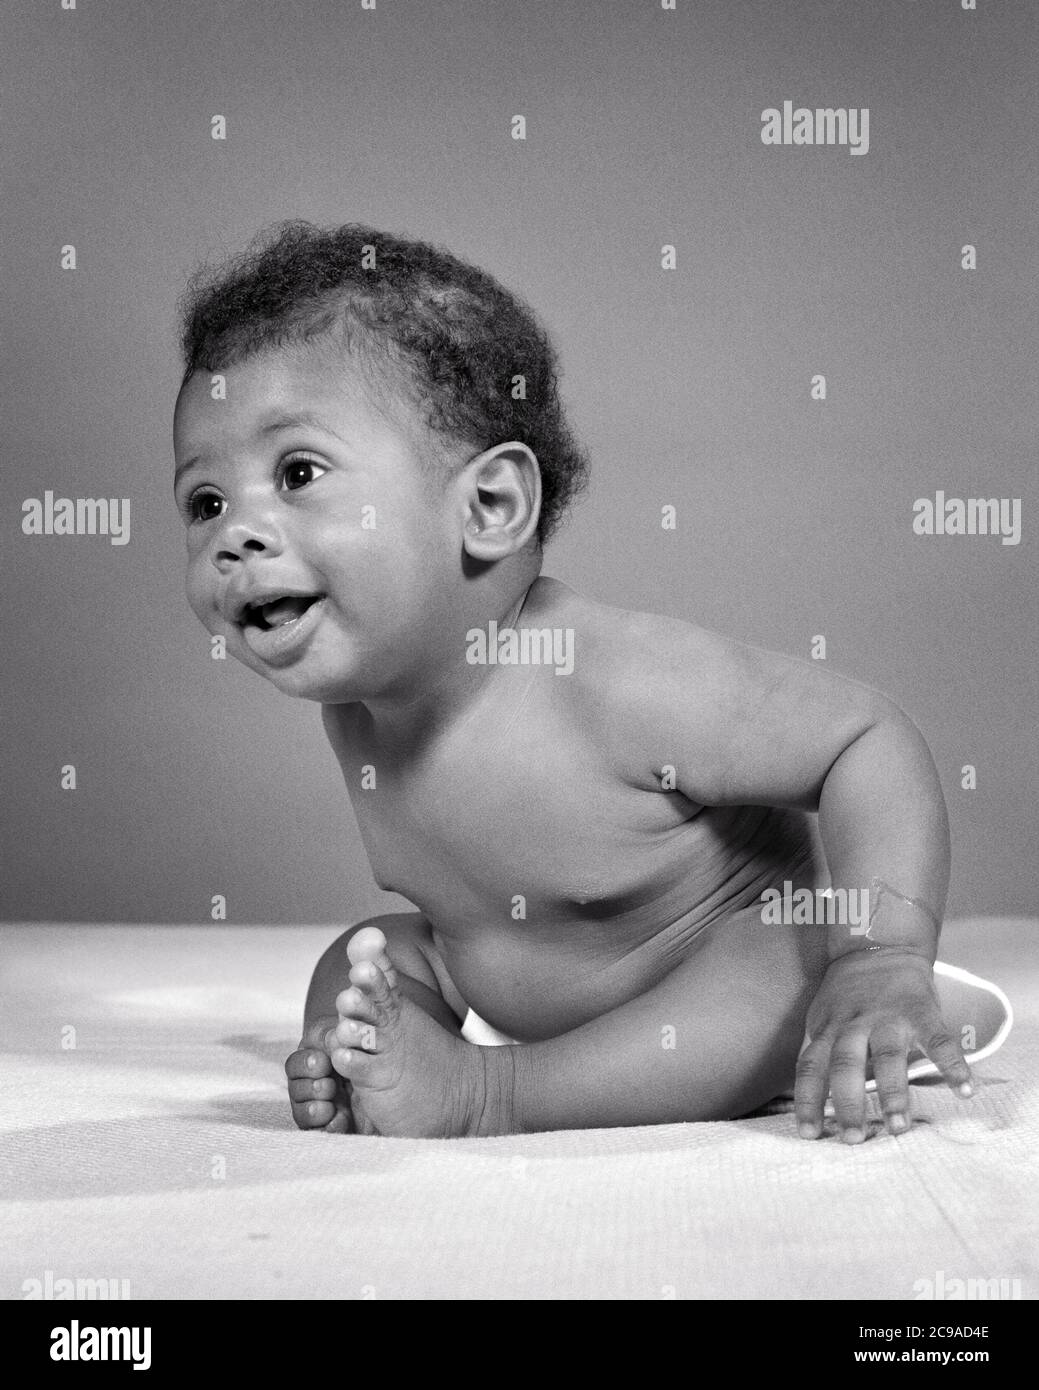 1960s ENERGETIC YOUNG AFRICAN-AMERICAN BABY BOY SITTING UP LEANING FORWARD WIDE-EYED AND CURIOUS - n2309 HAR001 HARS ADVENTURE DISCOVERY STRENGTH AFRICAN-AMERICANS AFRICAN-AMERICAN AND EXCITEMENT BLACK ETHNICITY UP CONCEPTUAL CURIOUS STYLISH BABY BOY WIDE-EYED ENERGETIC GROWTH JUVENILES BLACK AND WHITE HAR001 INQUISITIVE OLD FASHIONED AFRICAN AMERICANS Stock Photo